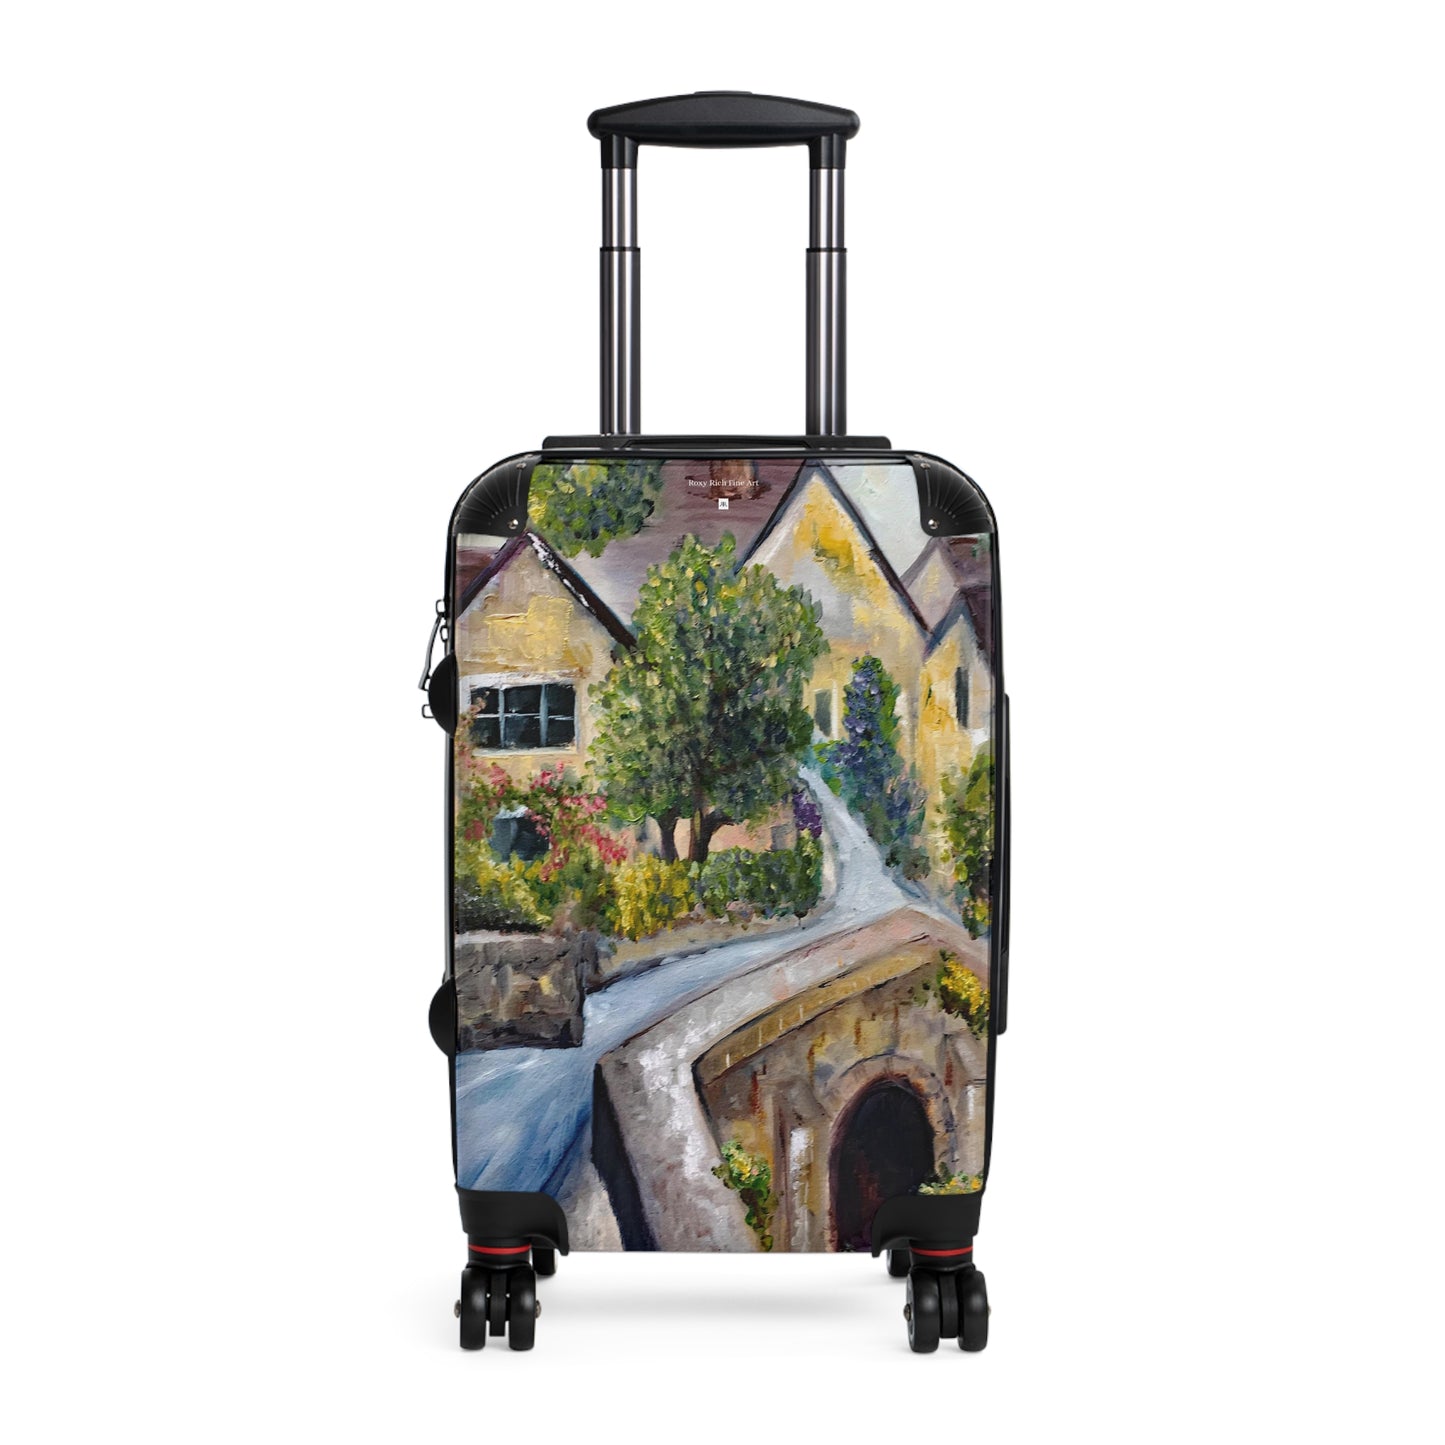 Castle Combe Carry On Suitcase (or 3 pc set)